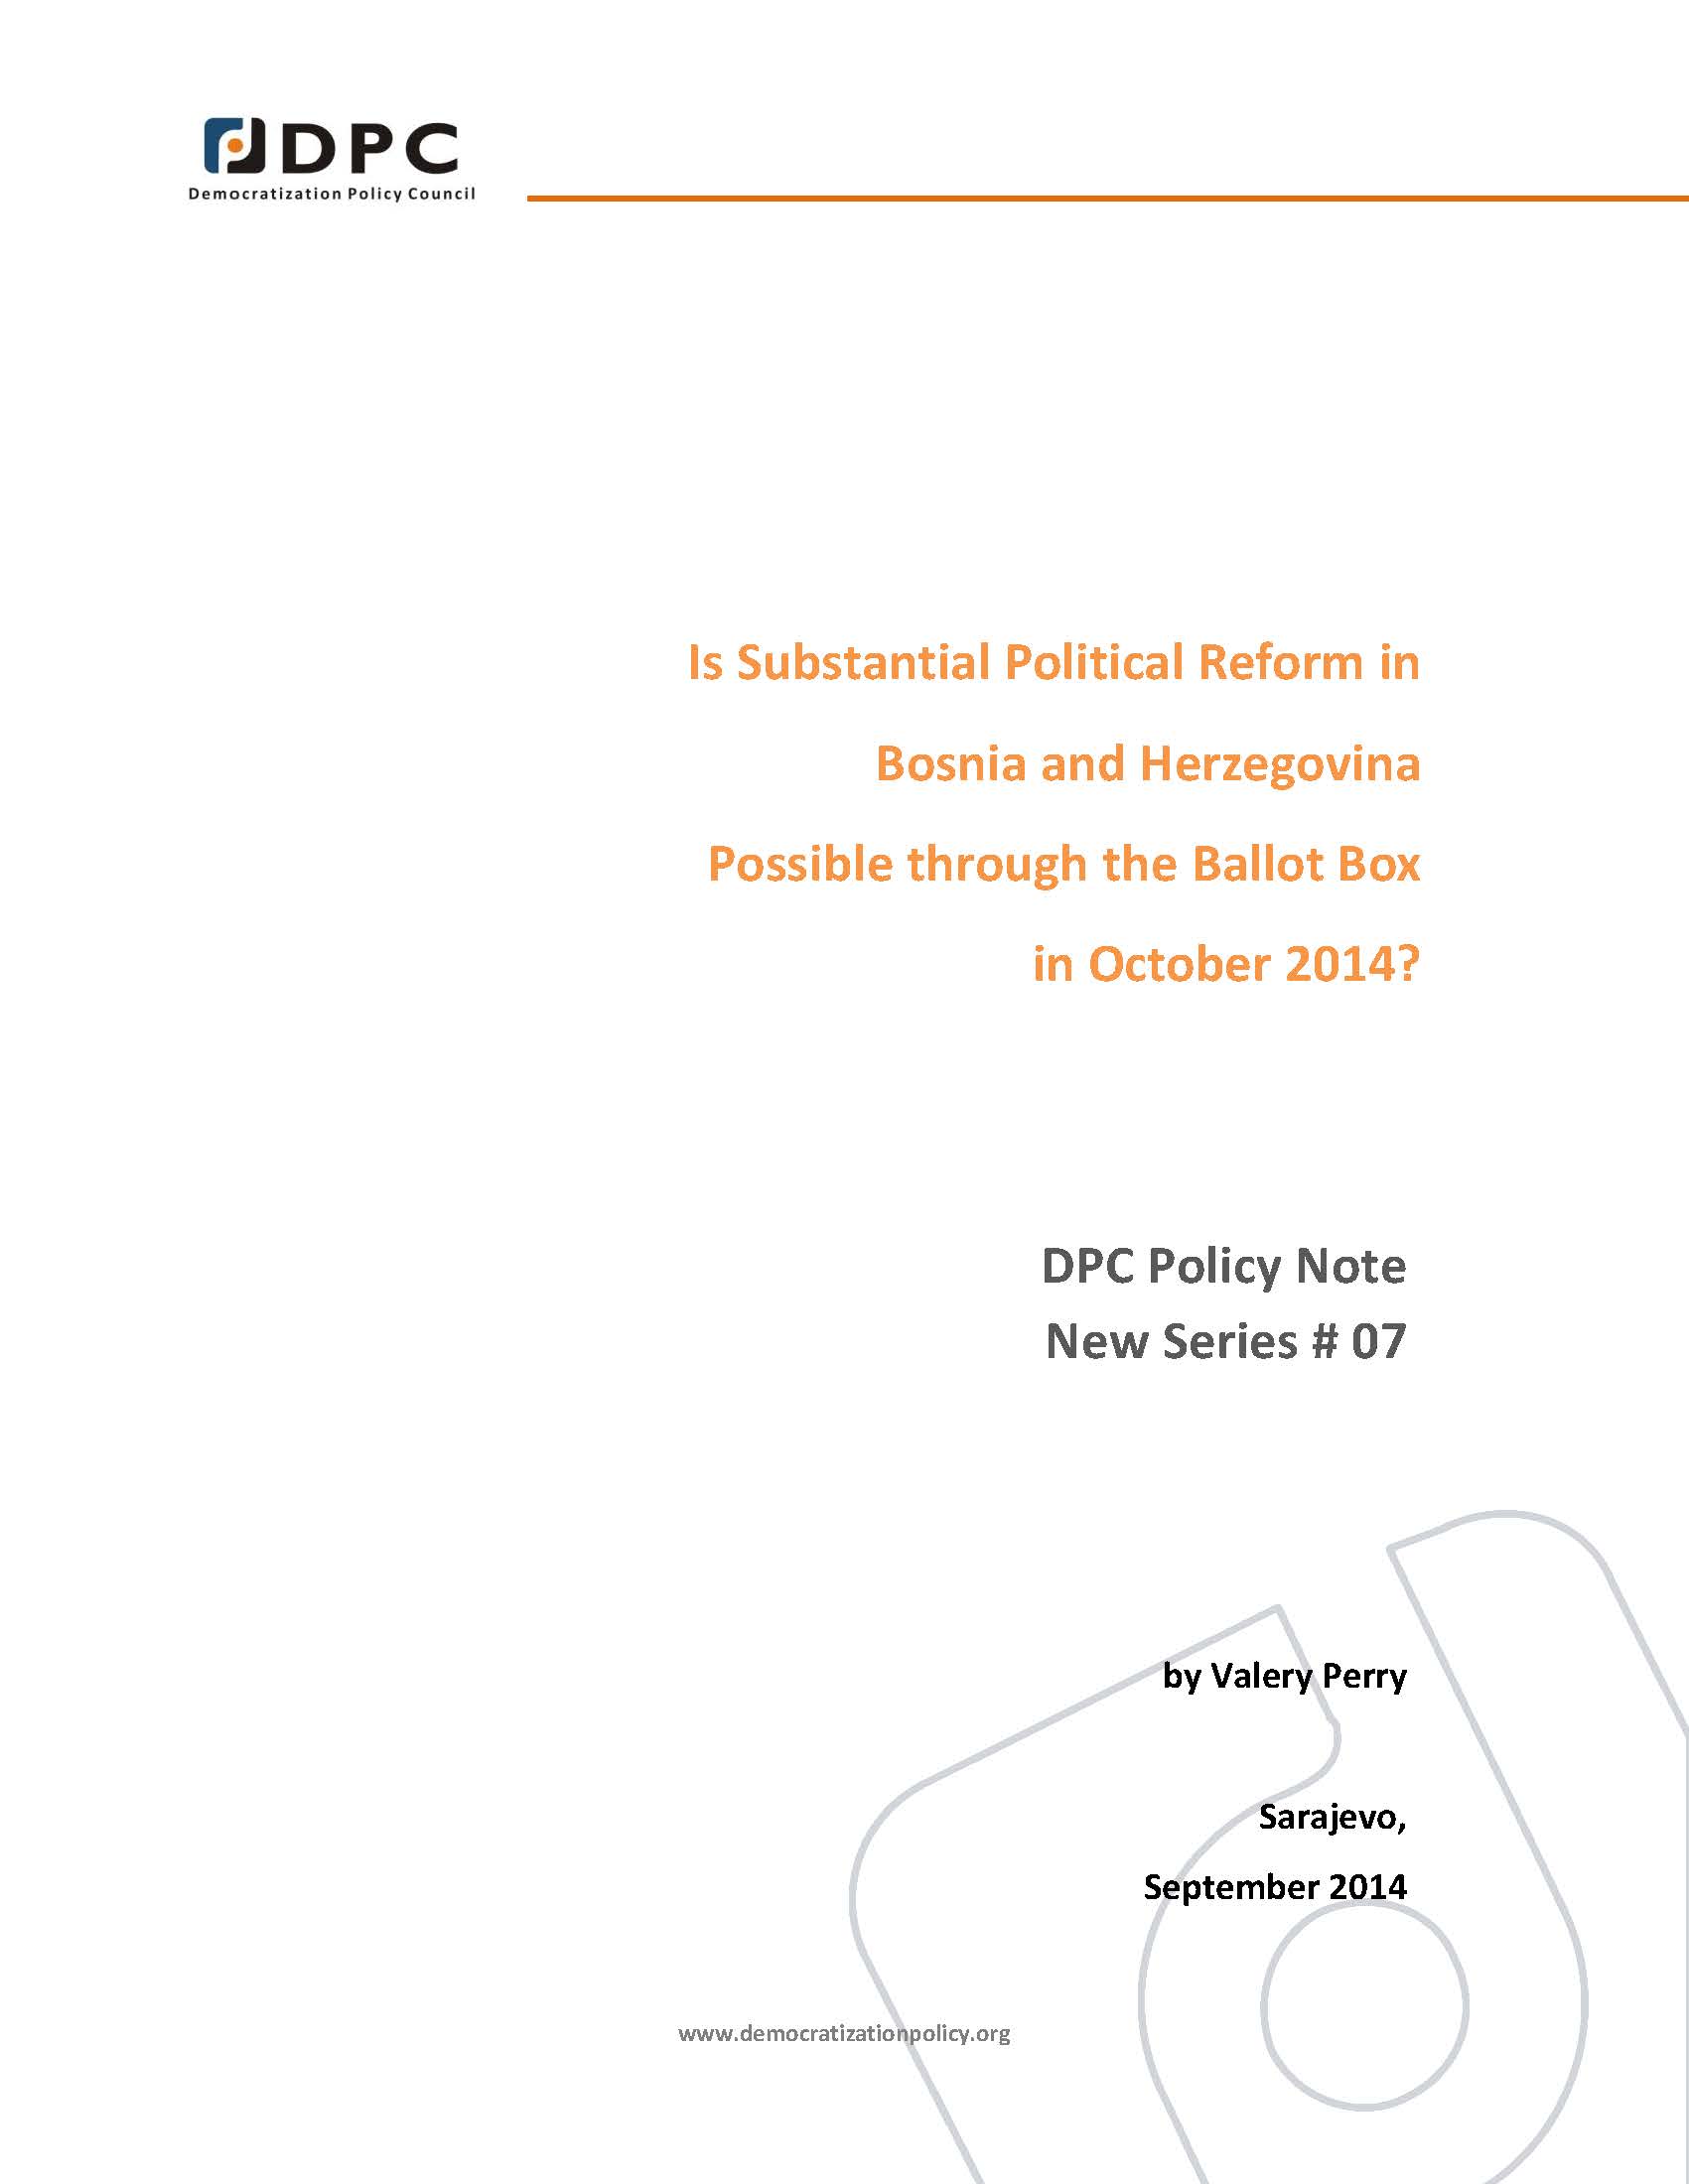 DPC POLICY NOTE 07: Is Substantial Political Reform in Bosnia and Herzegovina Possible through the Ballot Box in October 2014? Cover Image